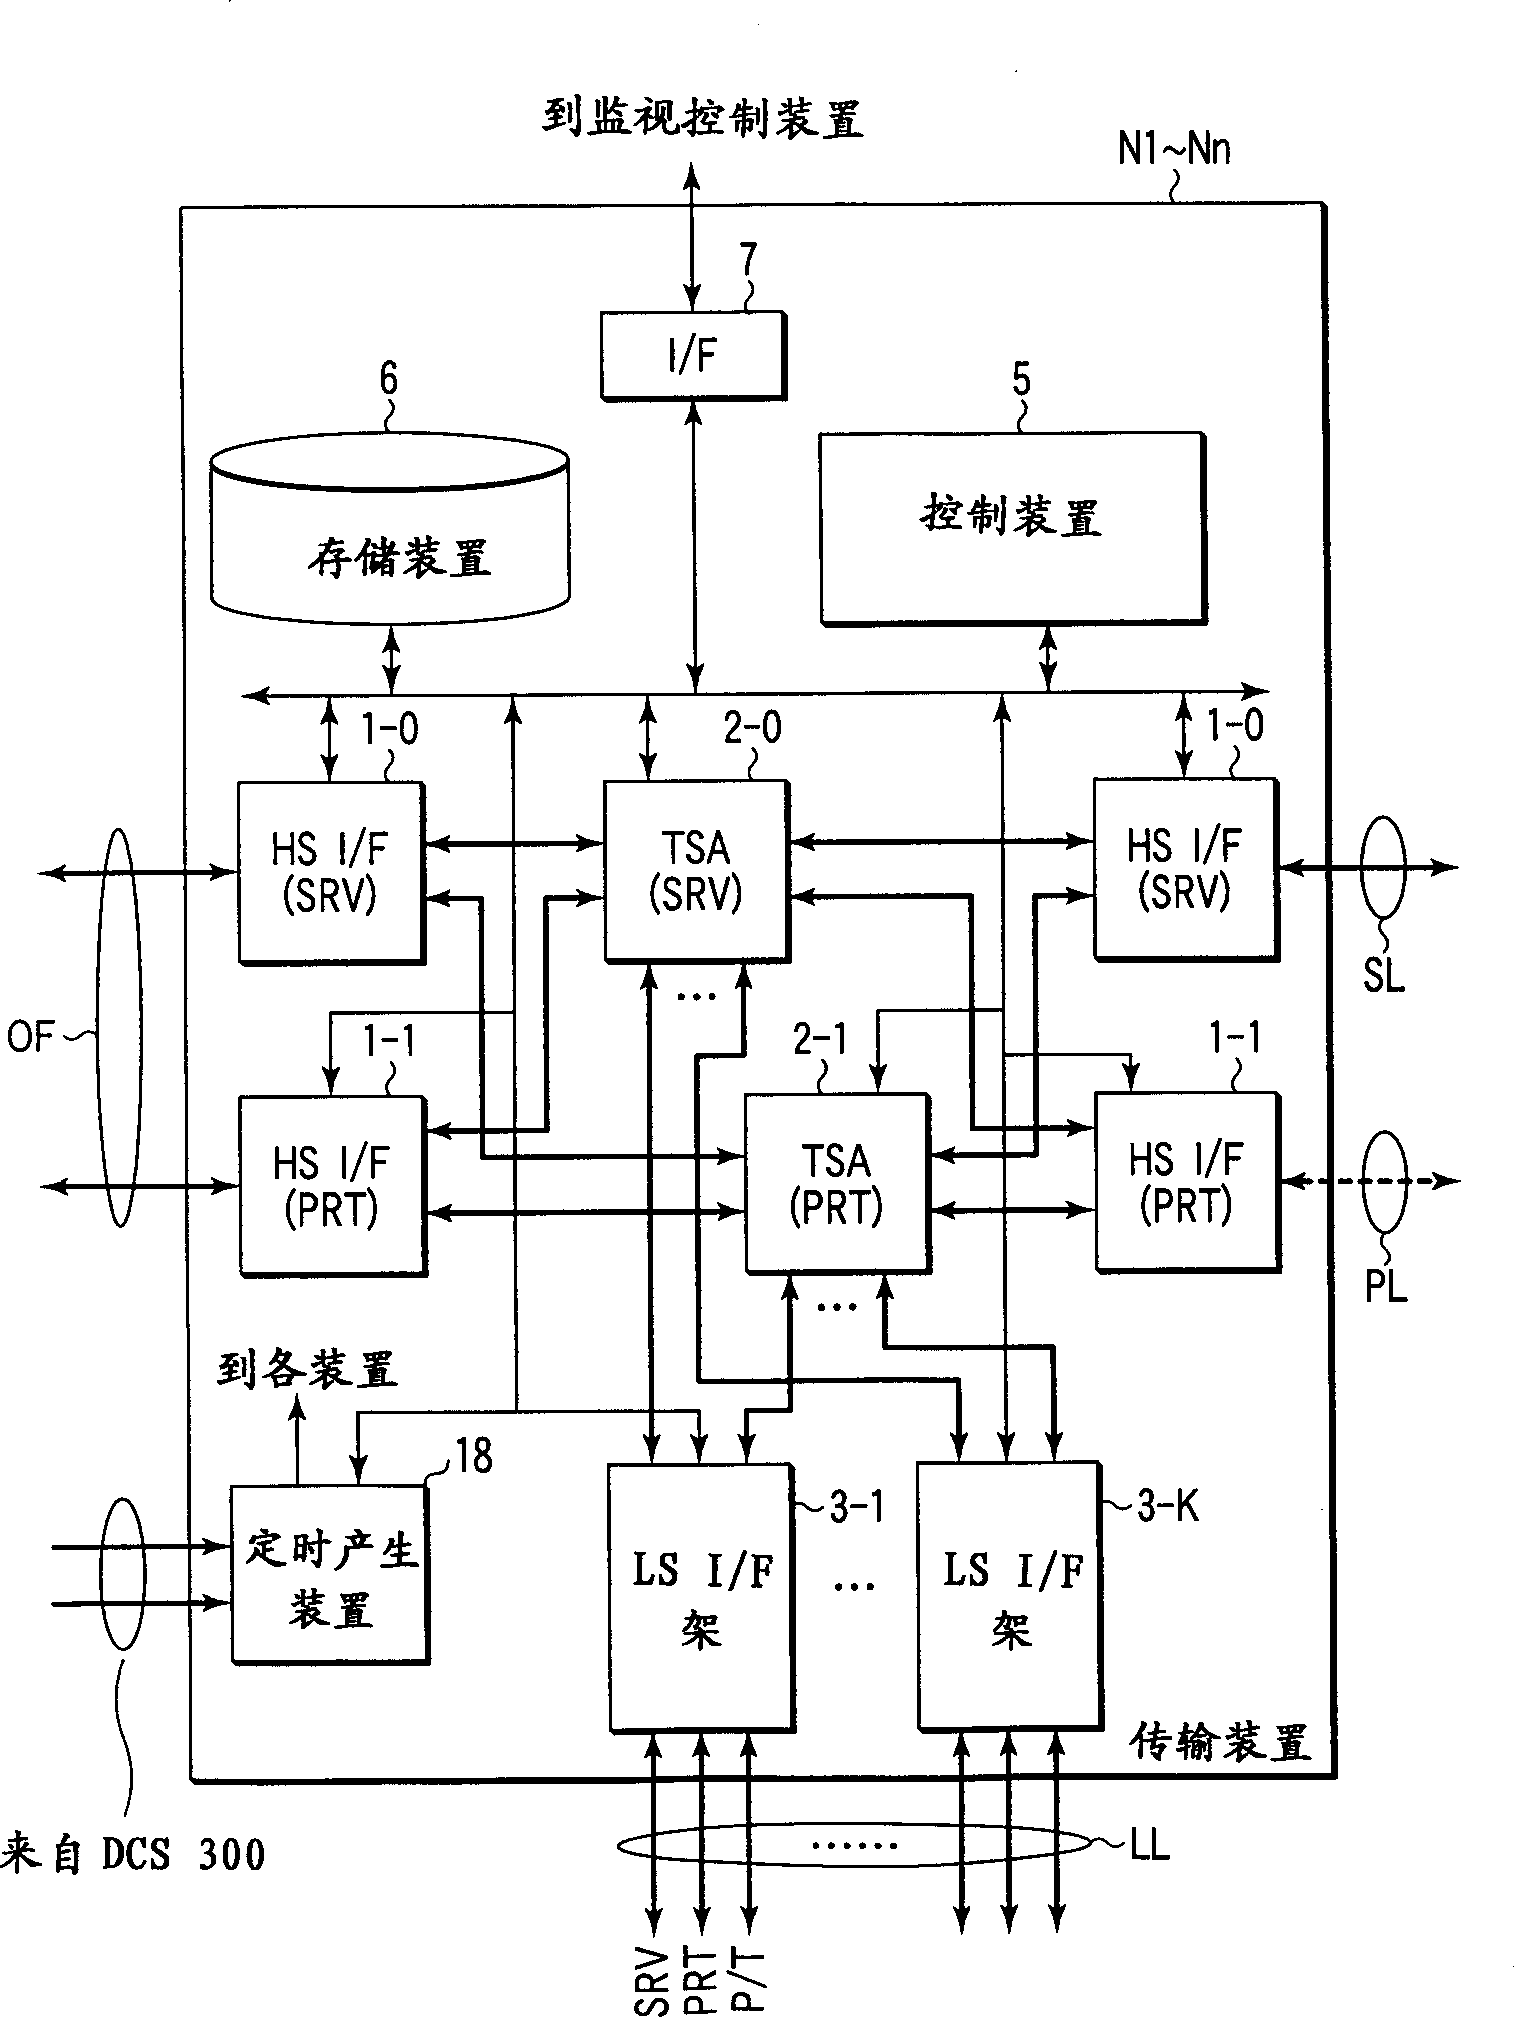 Transmitter and tributary interface board